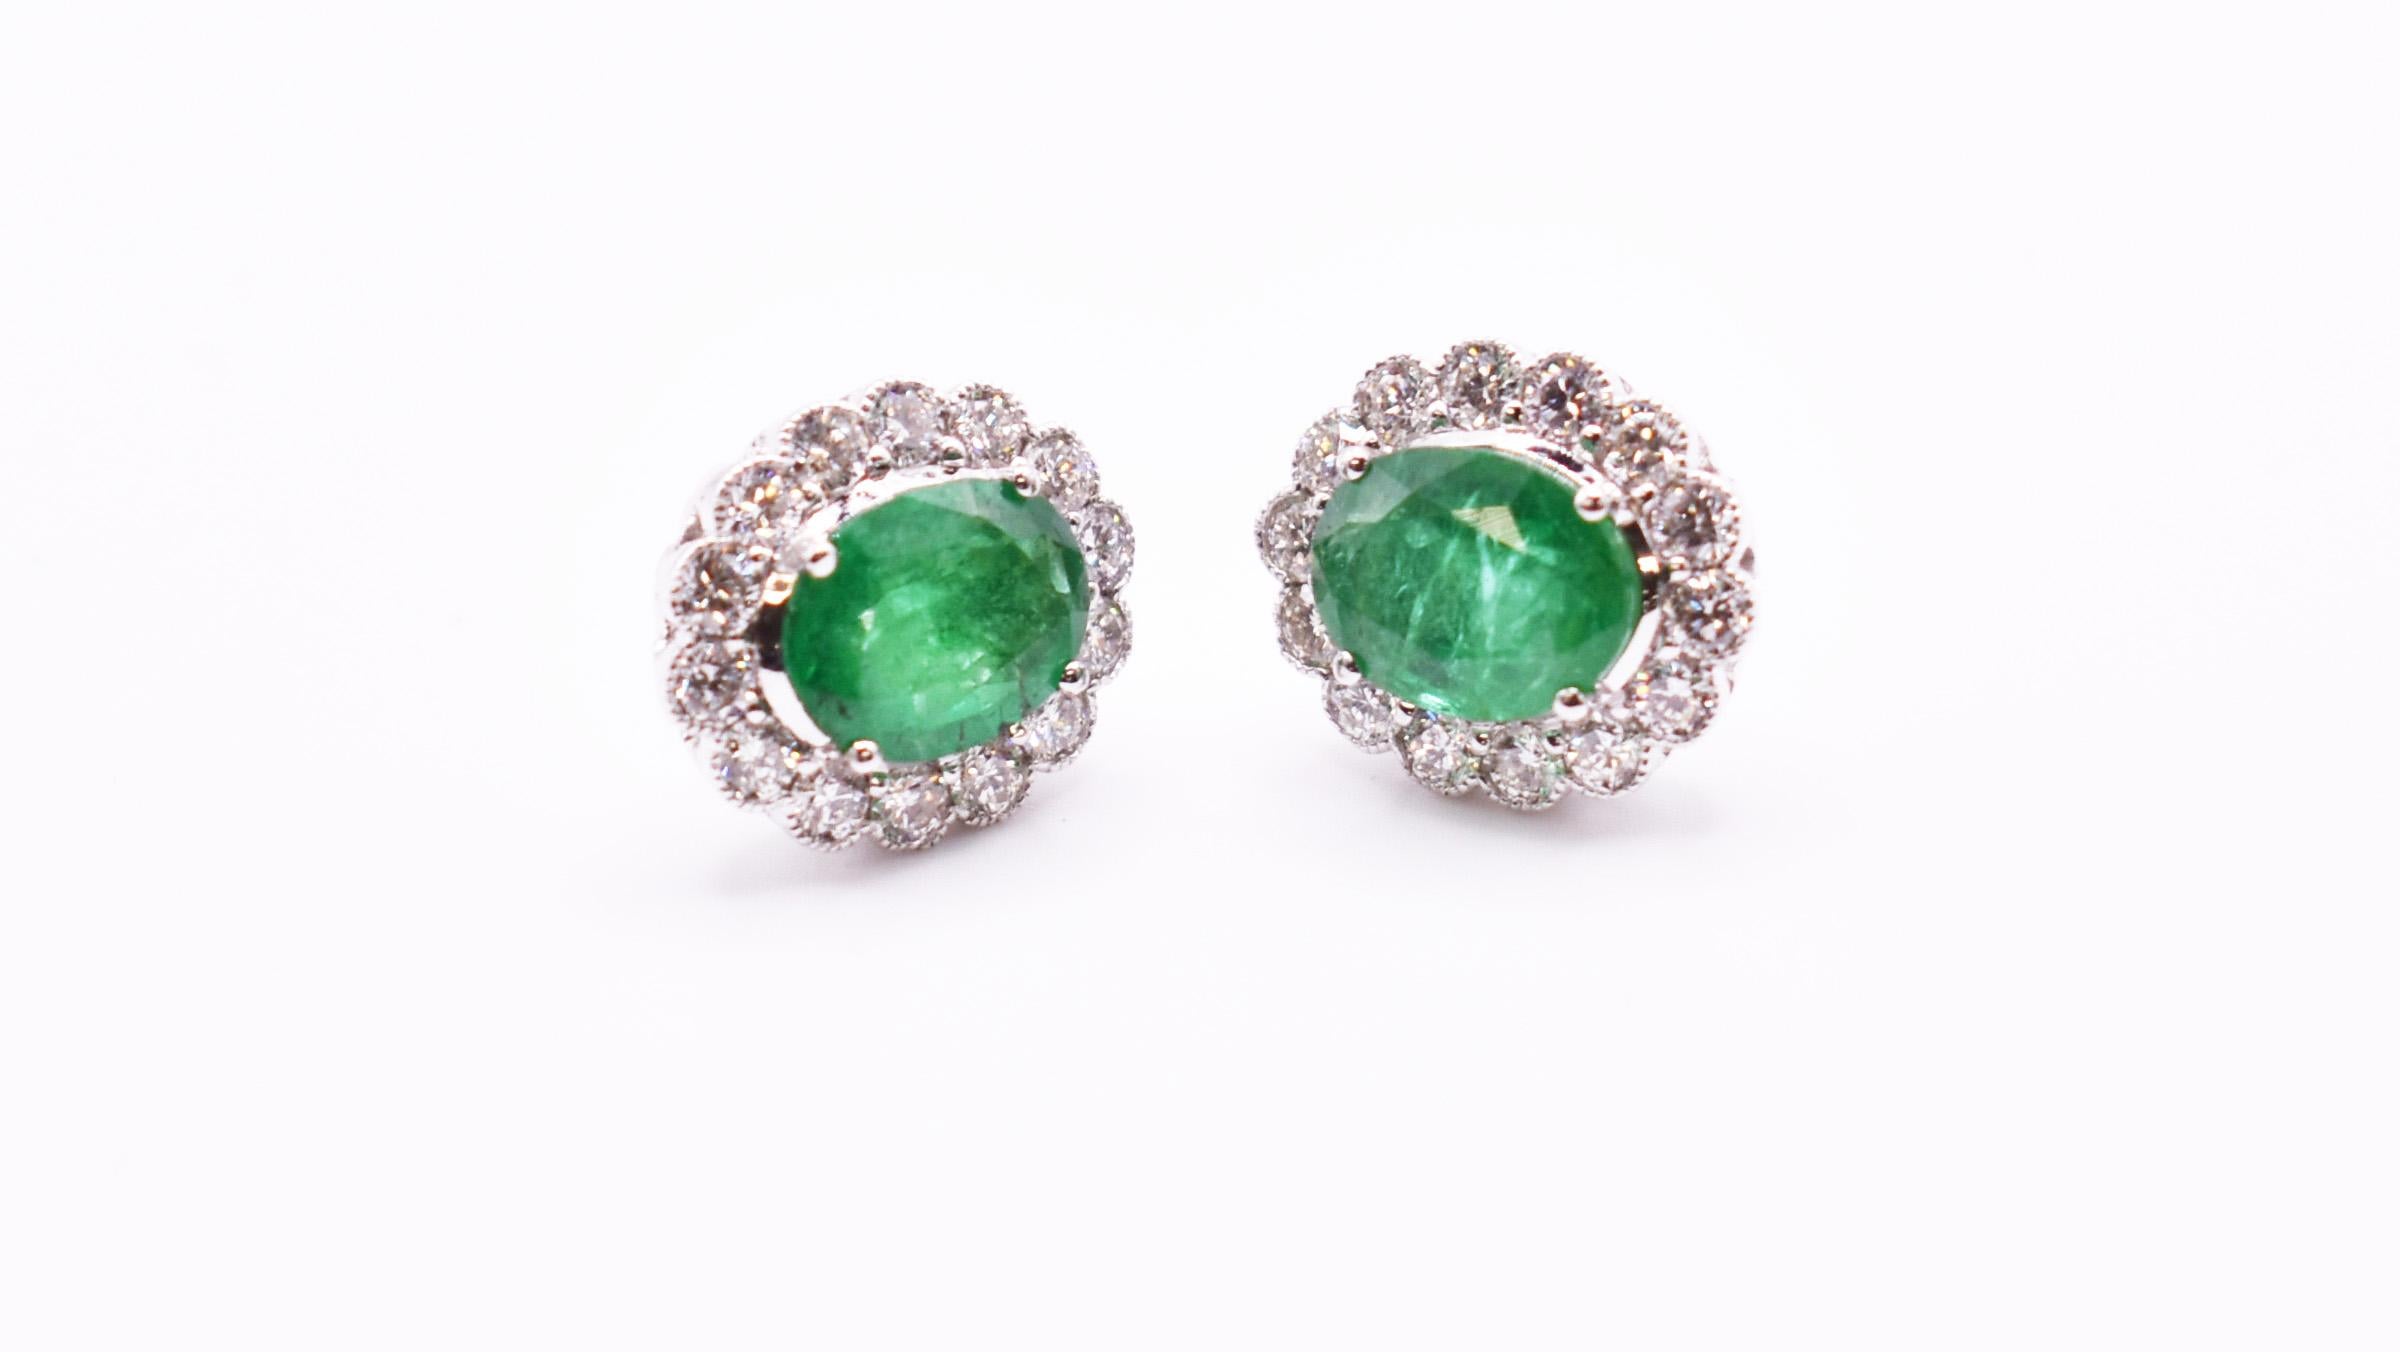 A fabulous pair of 18k white gold emerald and diamond earrings, having a claw set emerald of very nice colour and decent quality emerald which weighs 3.23 ct, each having 14 miligrain set diamonds. 

Emerald: 3.23ct
Diamond: 1.26ct
Gold: 4.84g

RRP: